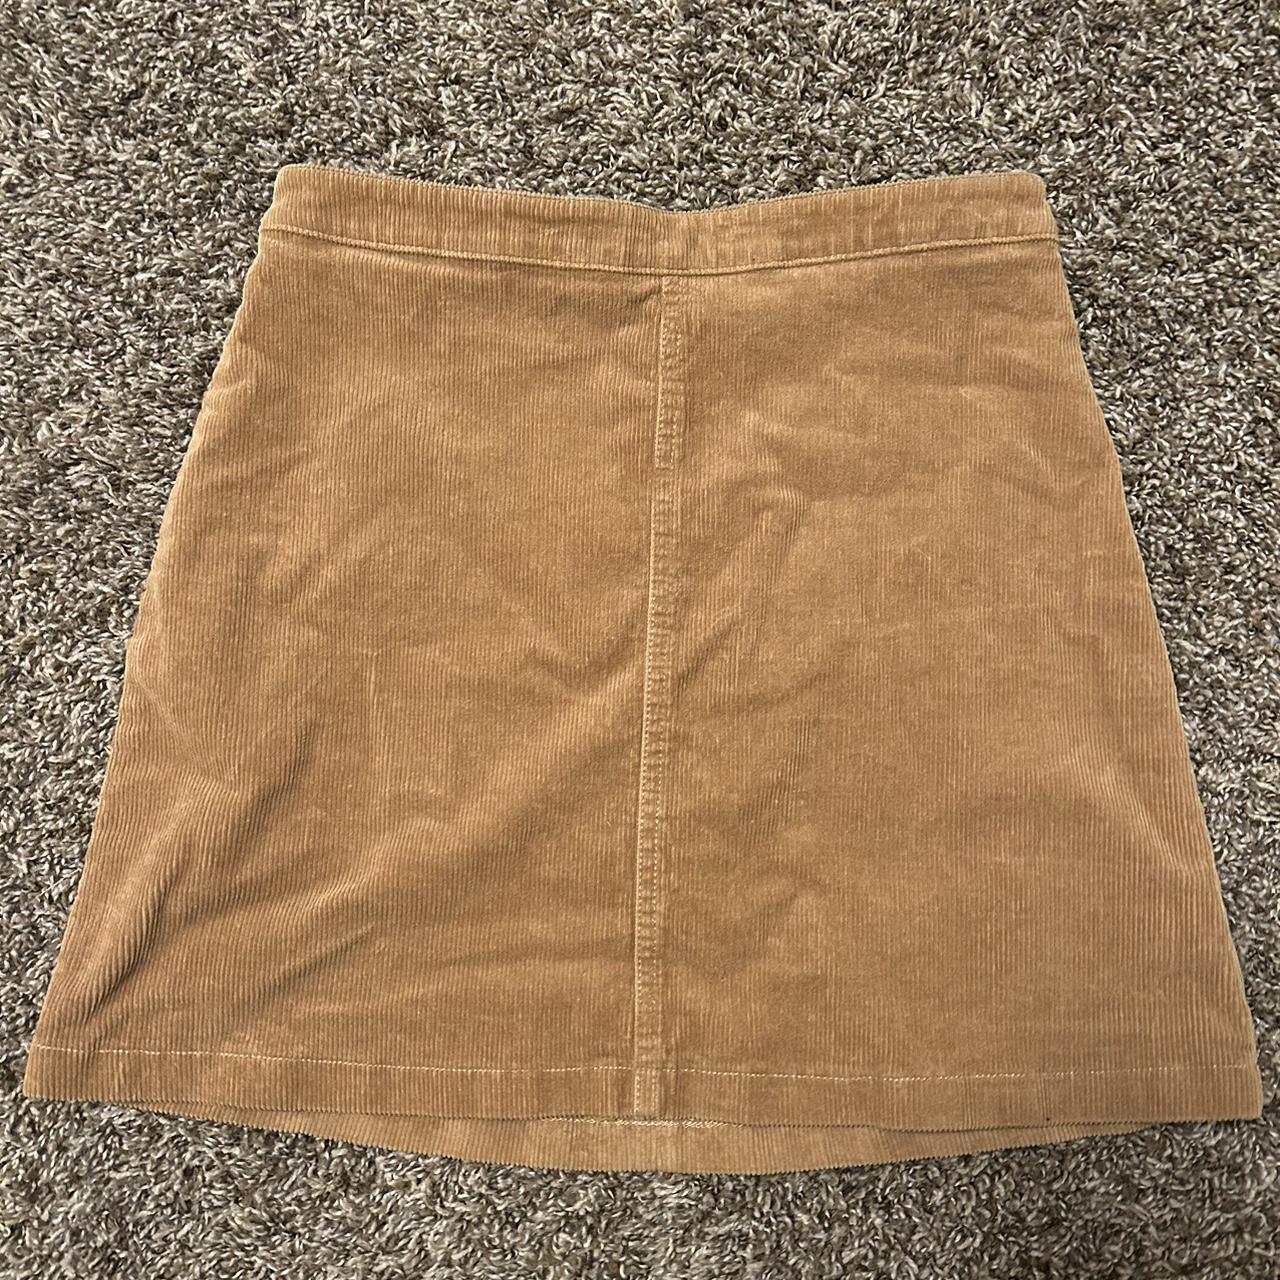 brown corduroy mini skirt size small no holes or stains - Depop